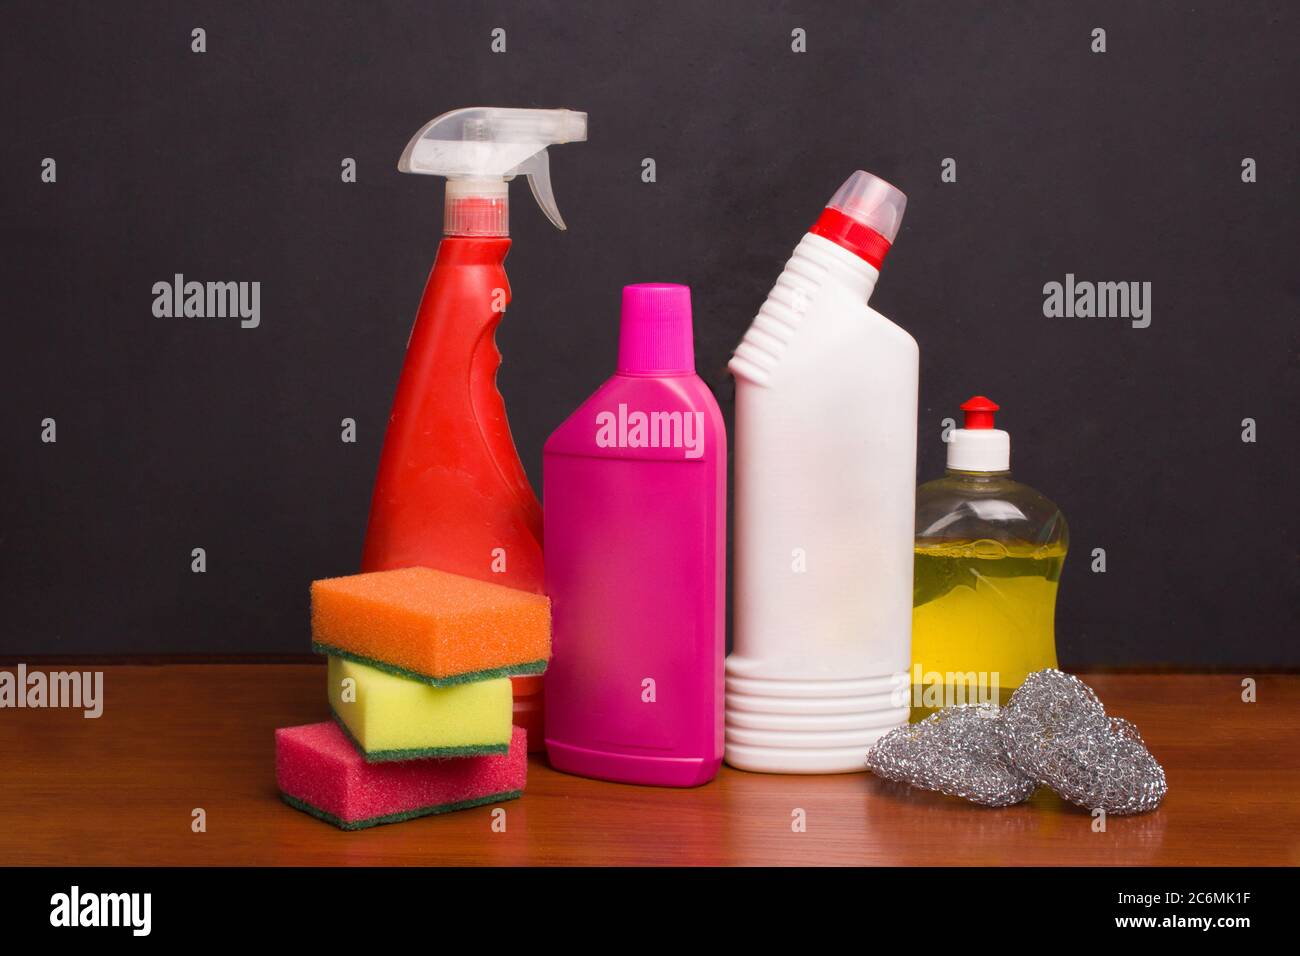 Set for cleaning various surfaces in the kitchen, bathroom and other areas. Concept of home cleaning services. Stock Photo